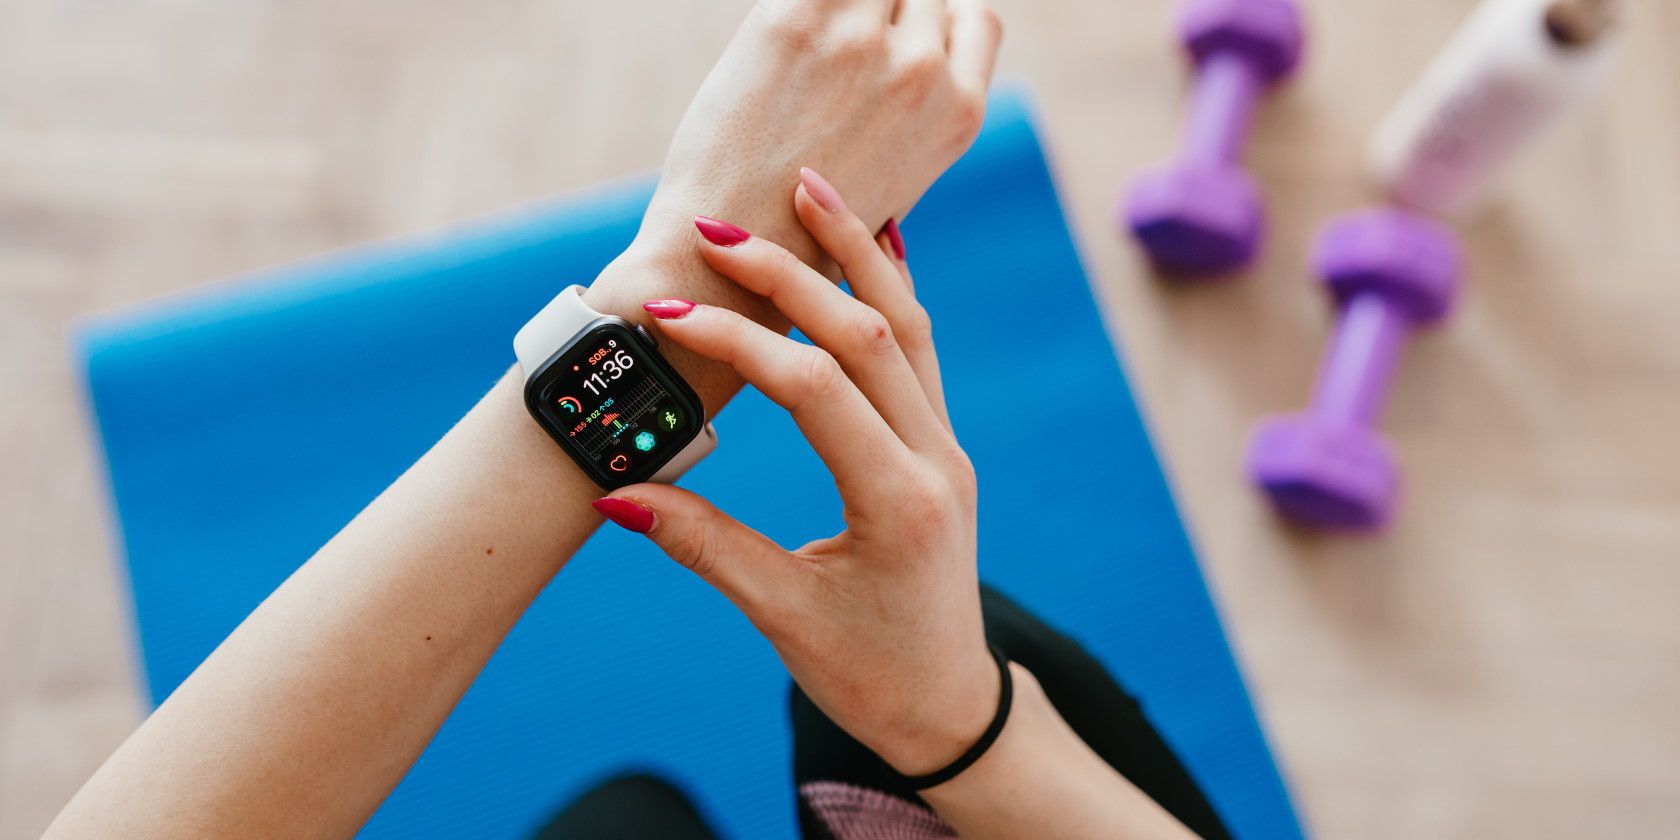 Woman checking smart watch fitness tracker wearable while exercising